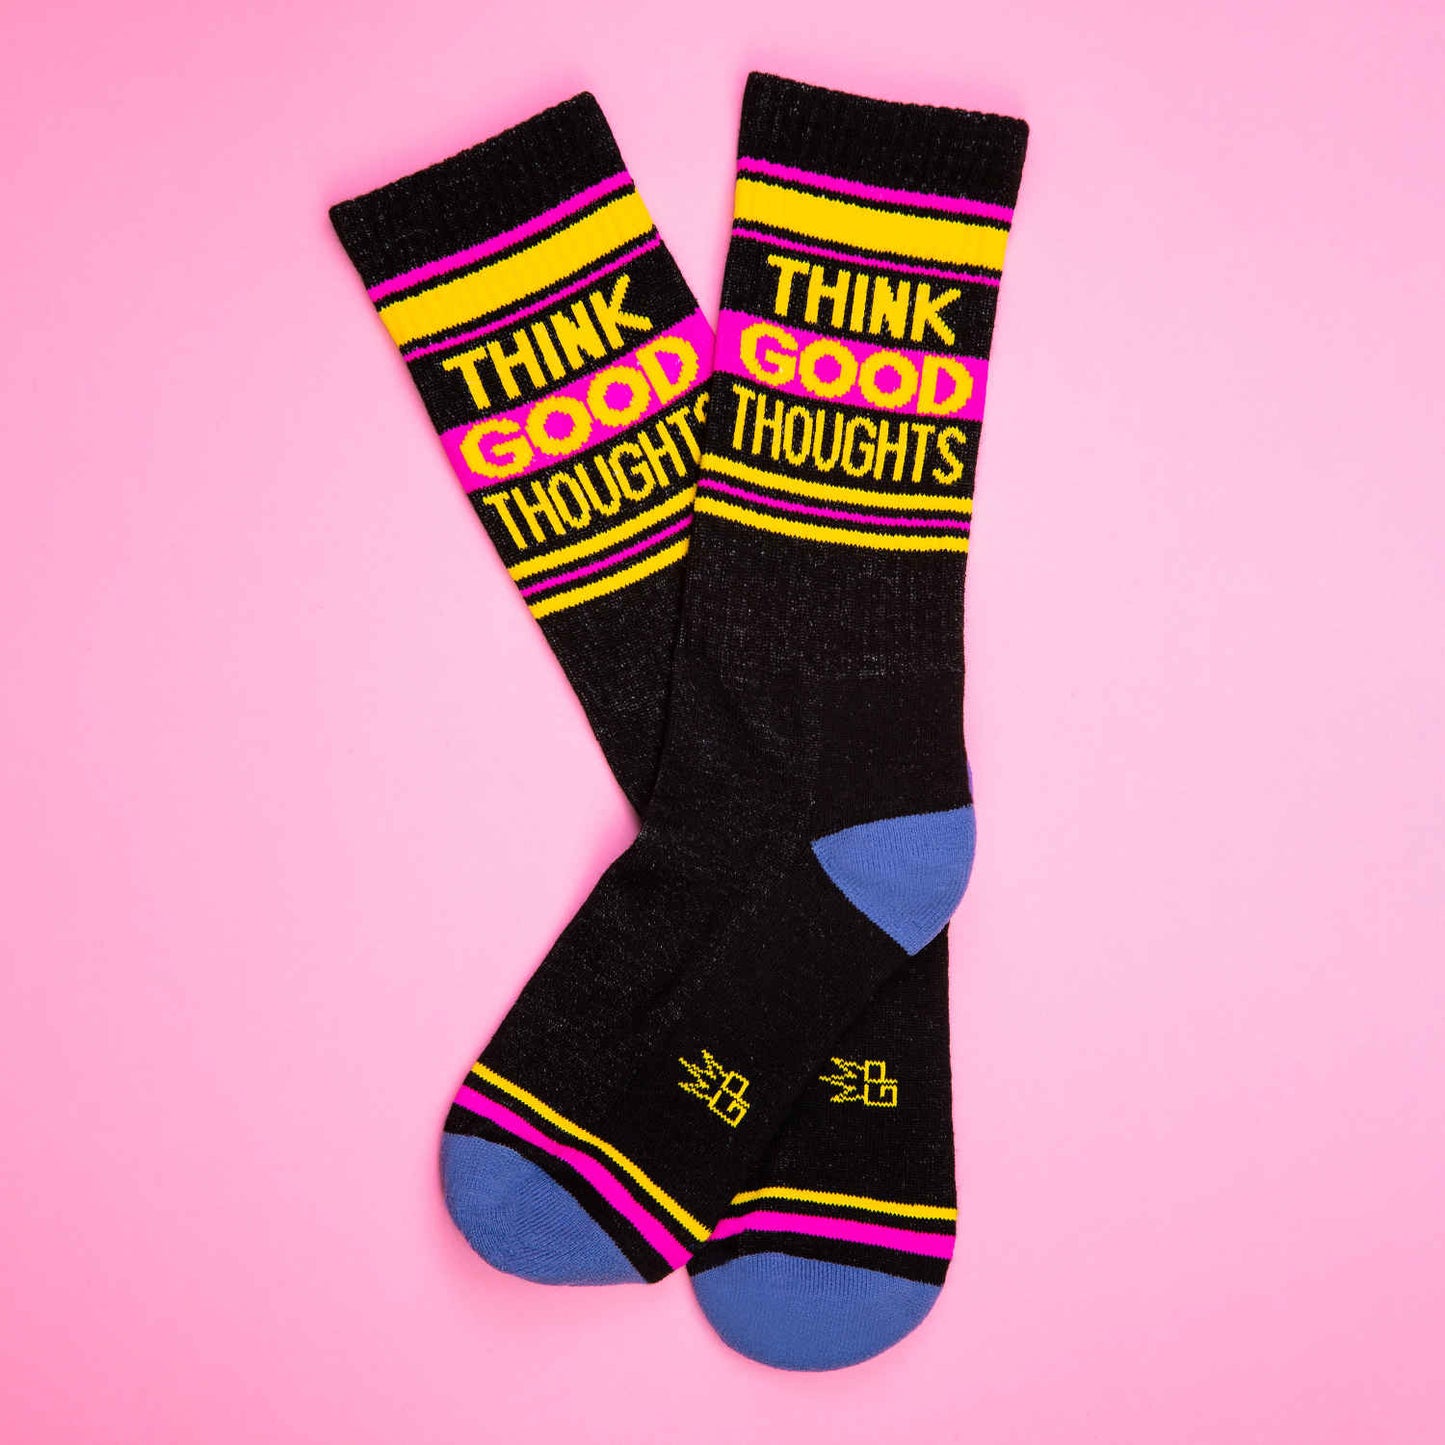 Think Good Thoughts Socks